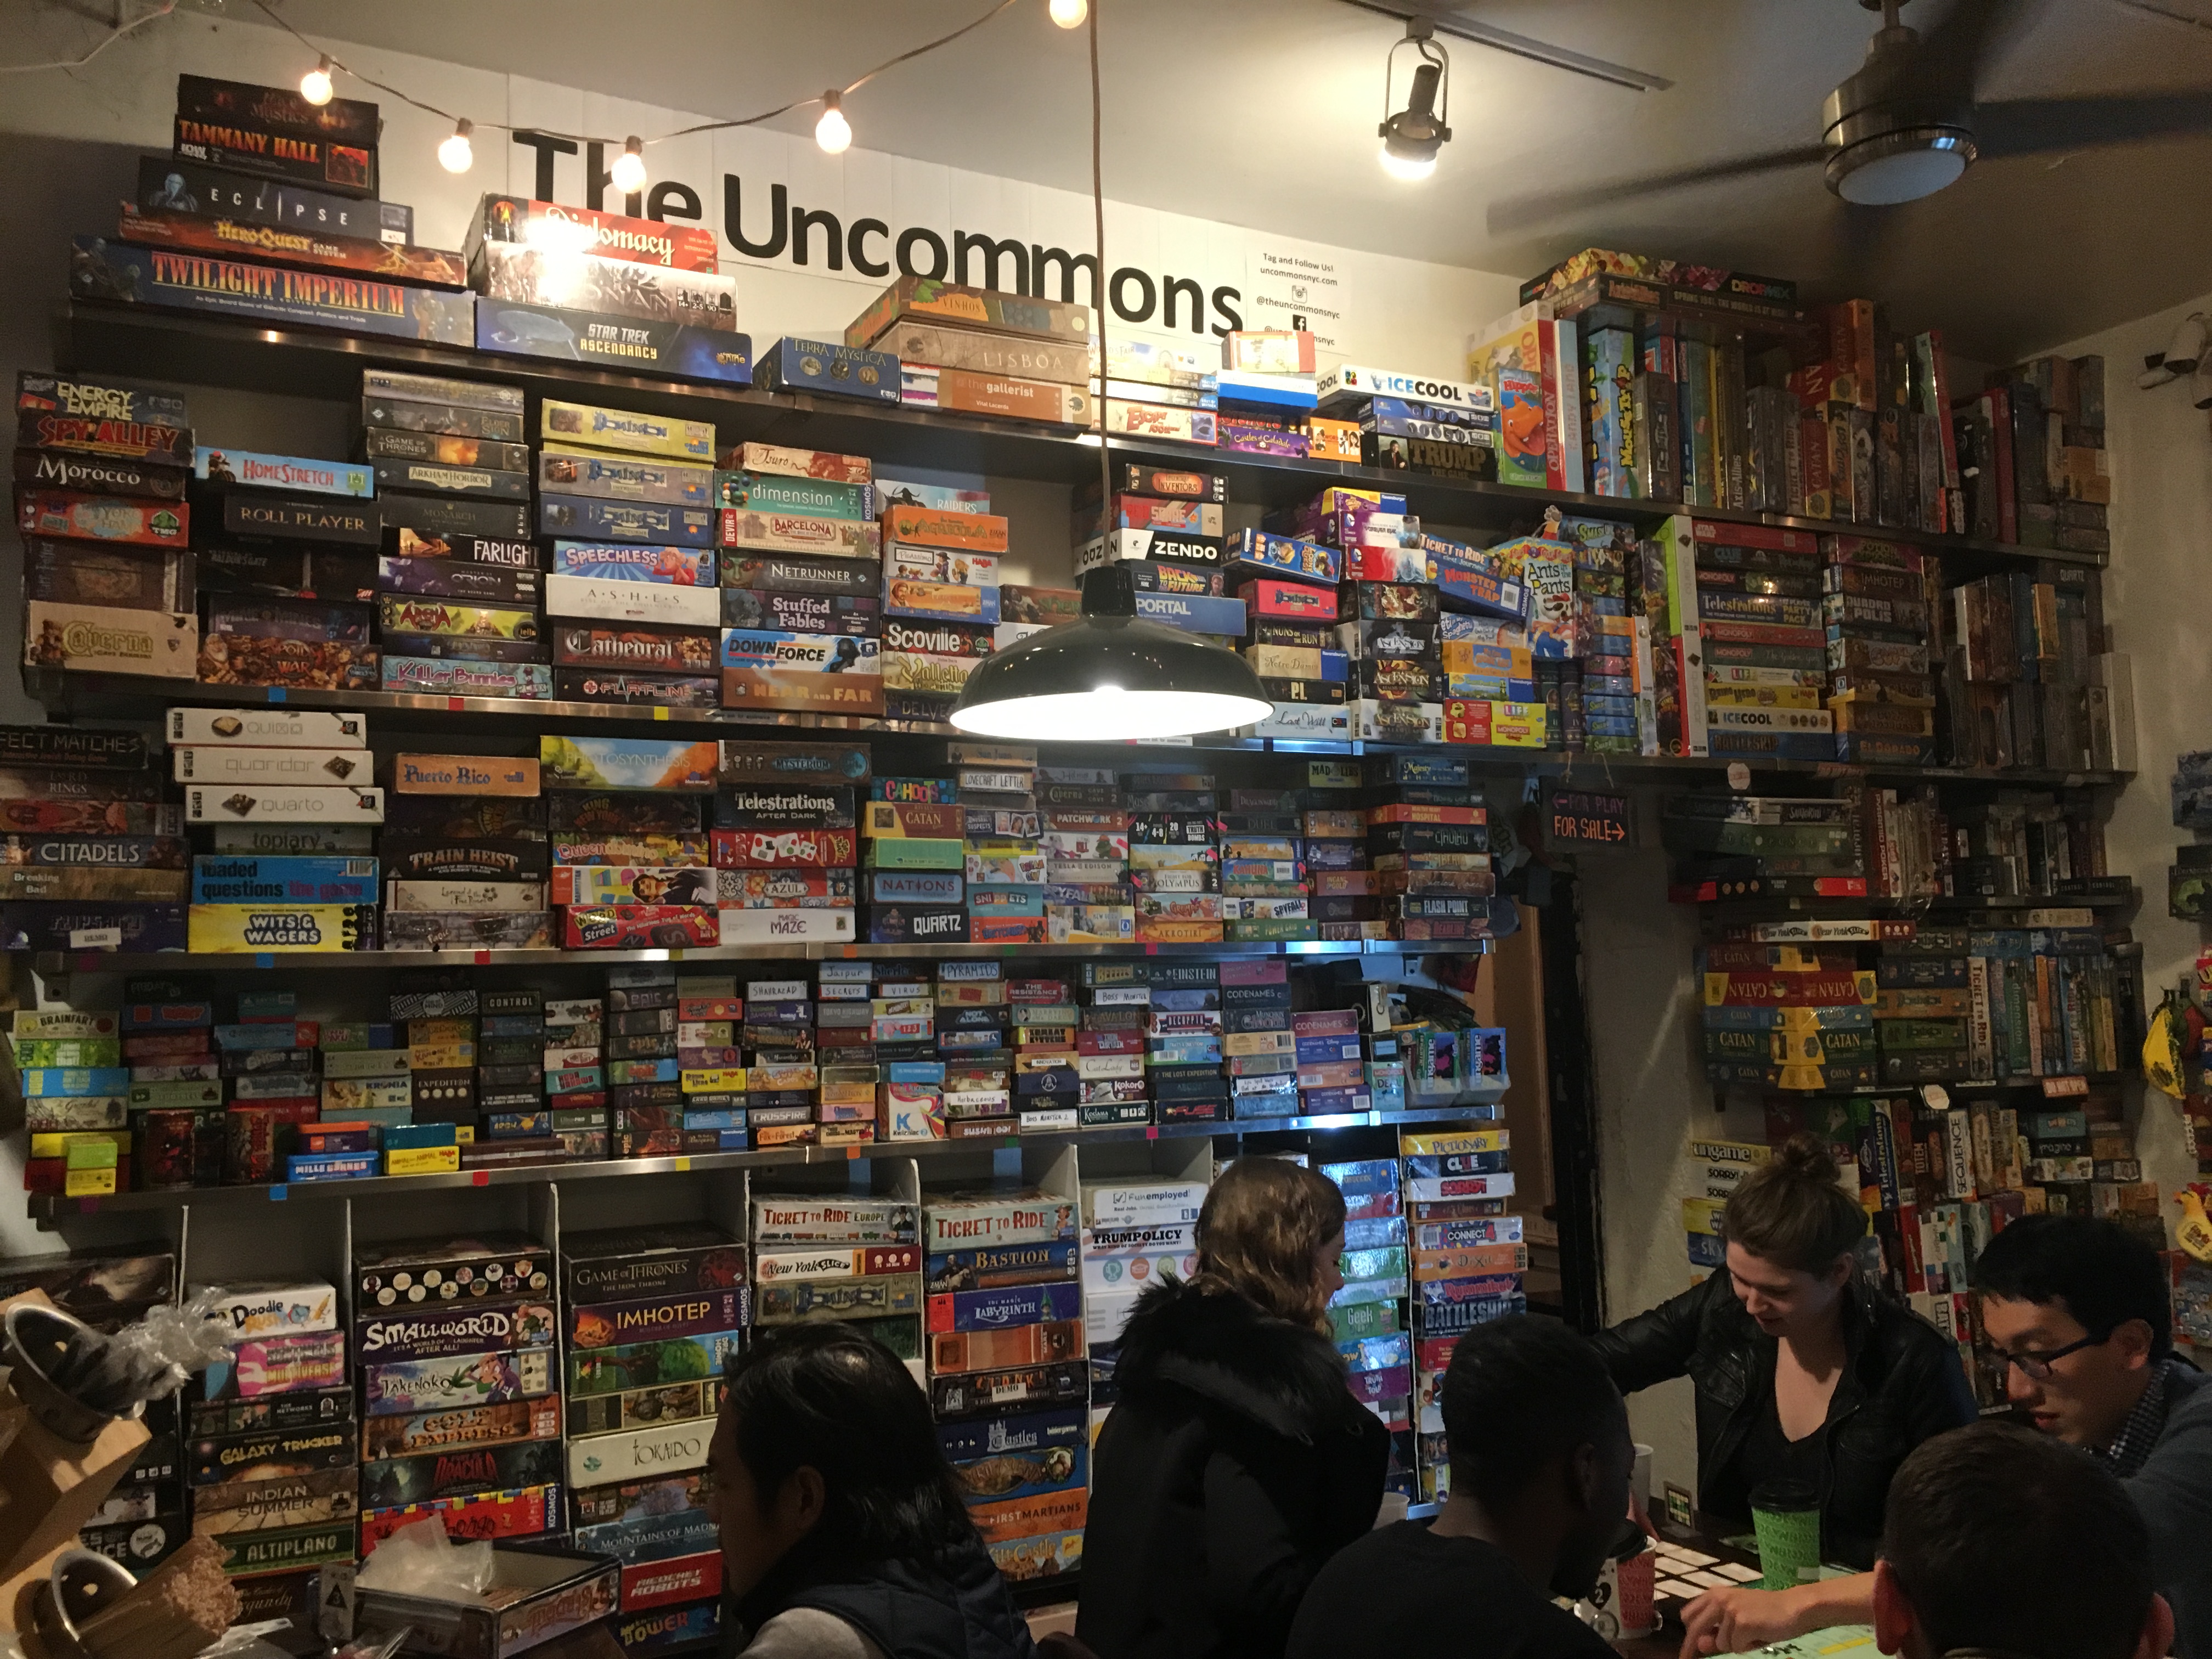 One of The Uncommons’ game walls. The store has hundreds of games for players to choose from.